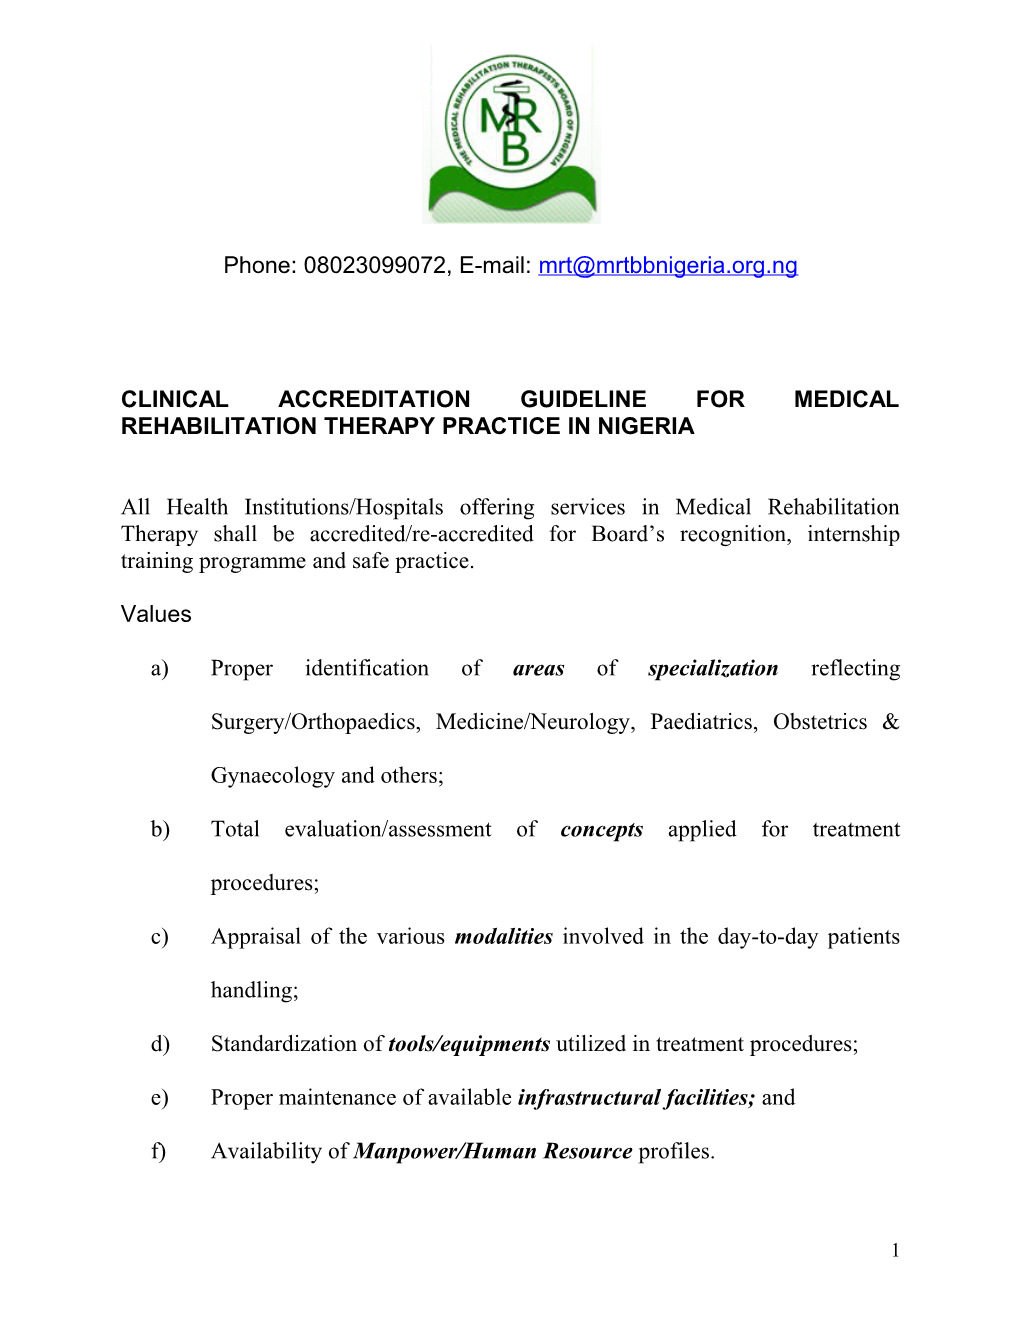 Clinical Accreditation Guideline for Medical Rehabilitation Therapy Practice in Nigeria